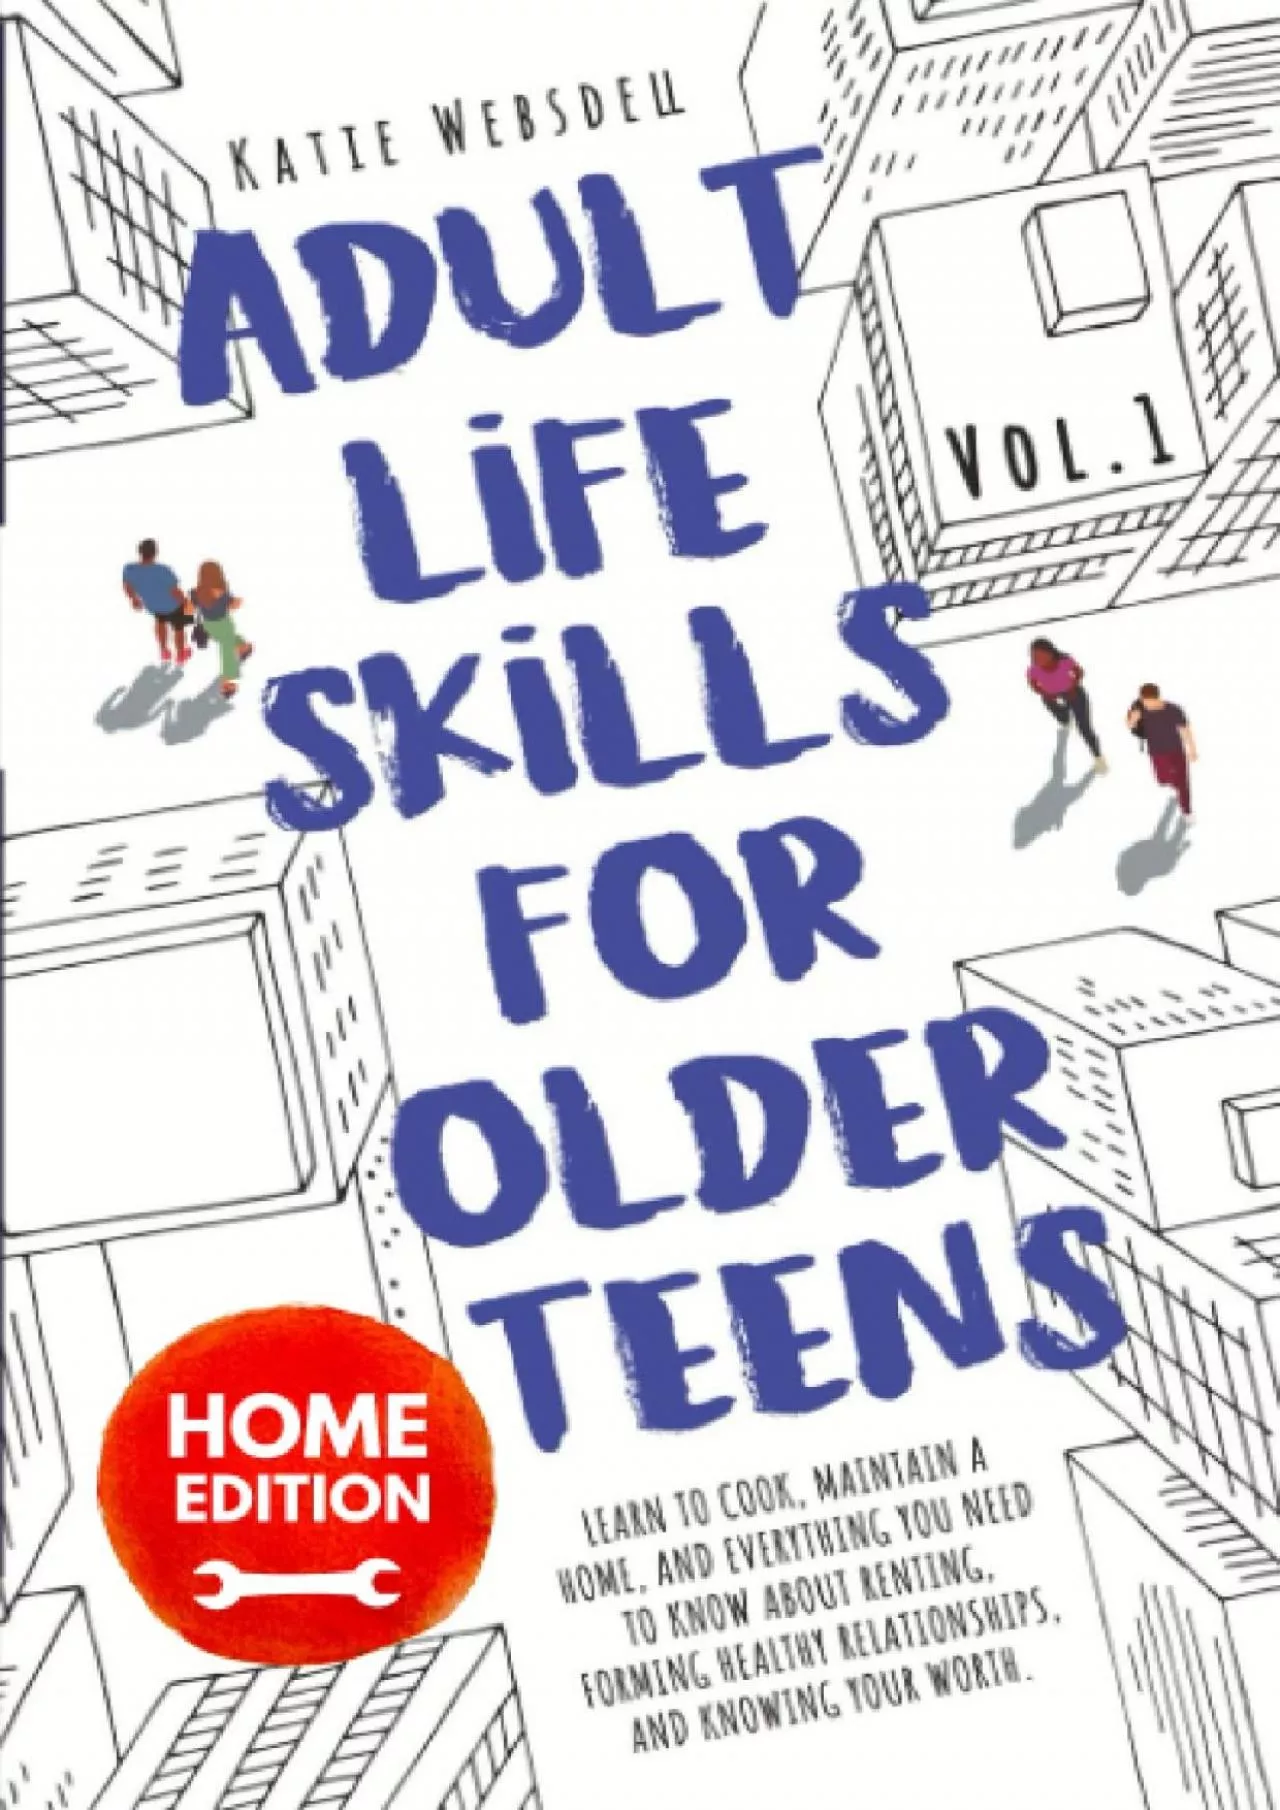 [DOWNLOAD] Adult Life Skills for Older Teens, Home Edition: Learn to Cook, Maintain a